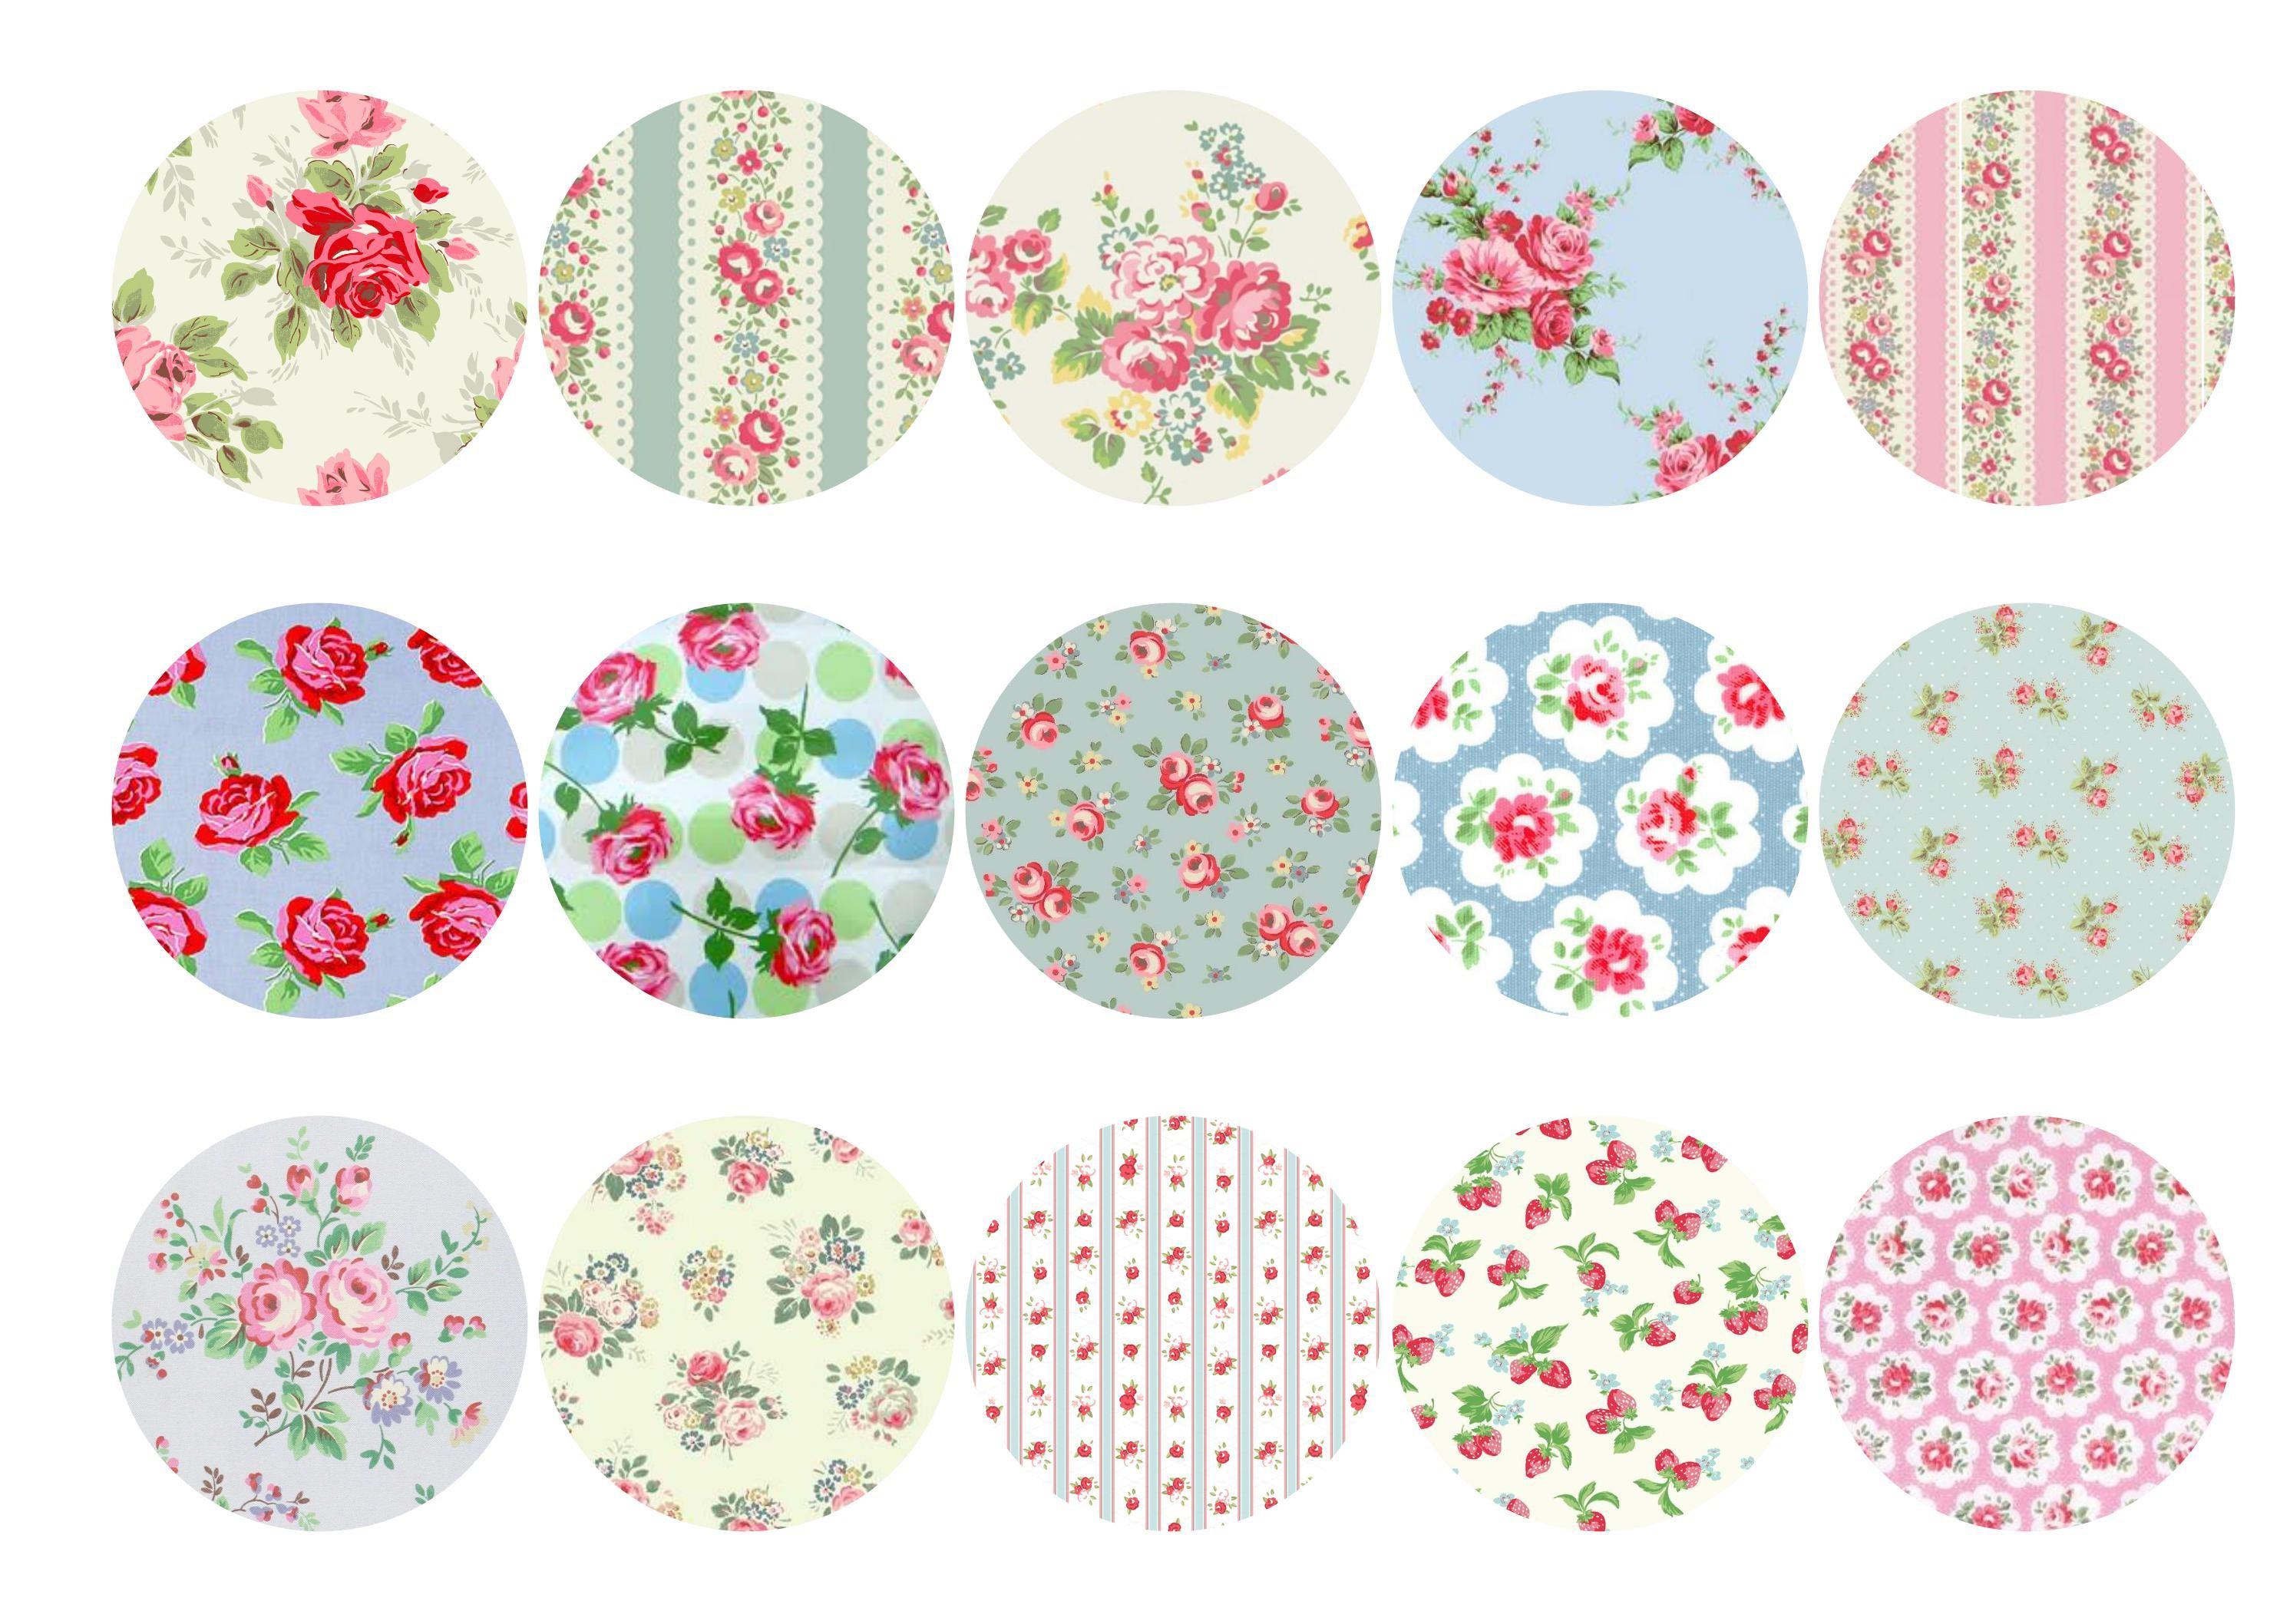 Printed cupcake toppers with Cath Kidston style designs